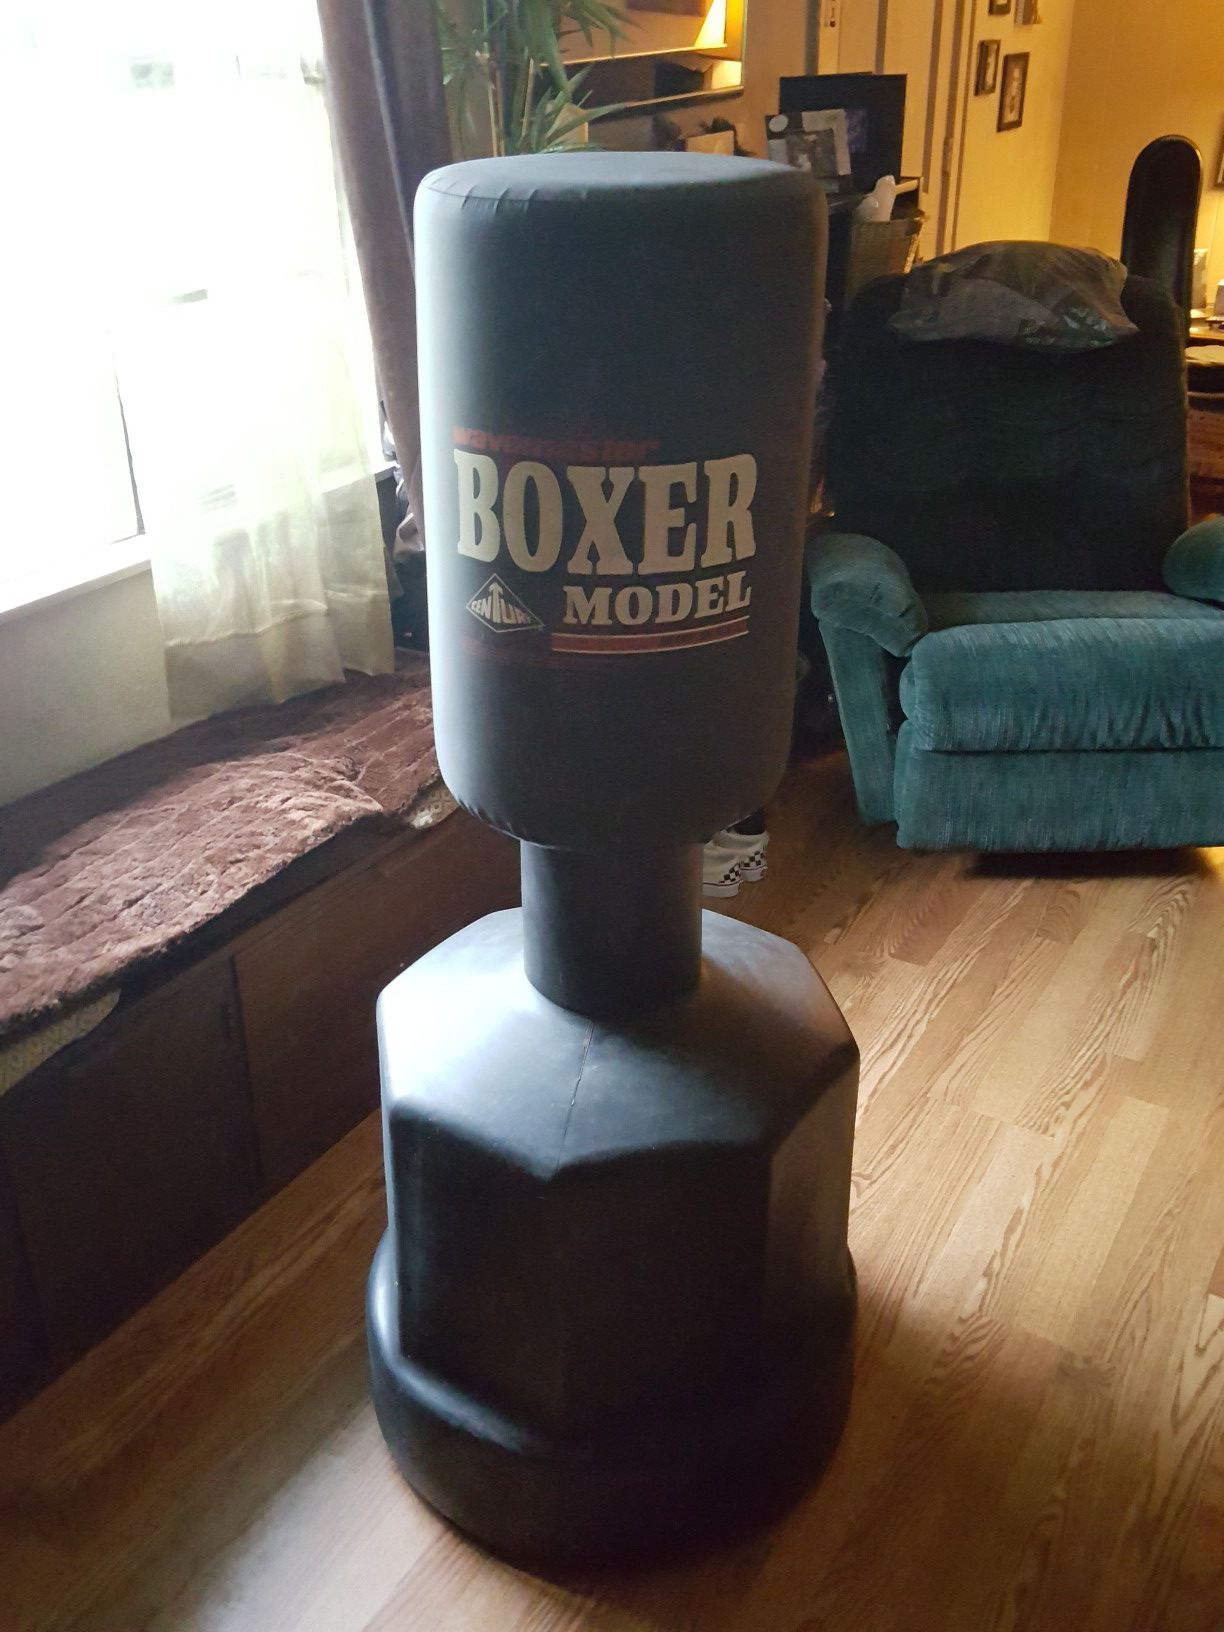 Wavemaster boxer standing punch bag, like new .Adjustable from leg, torso and head levels. Will accept $50 firm, originally $139.